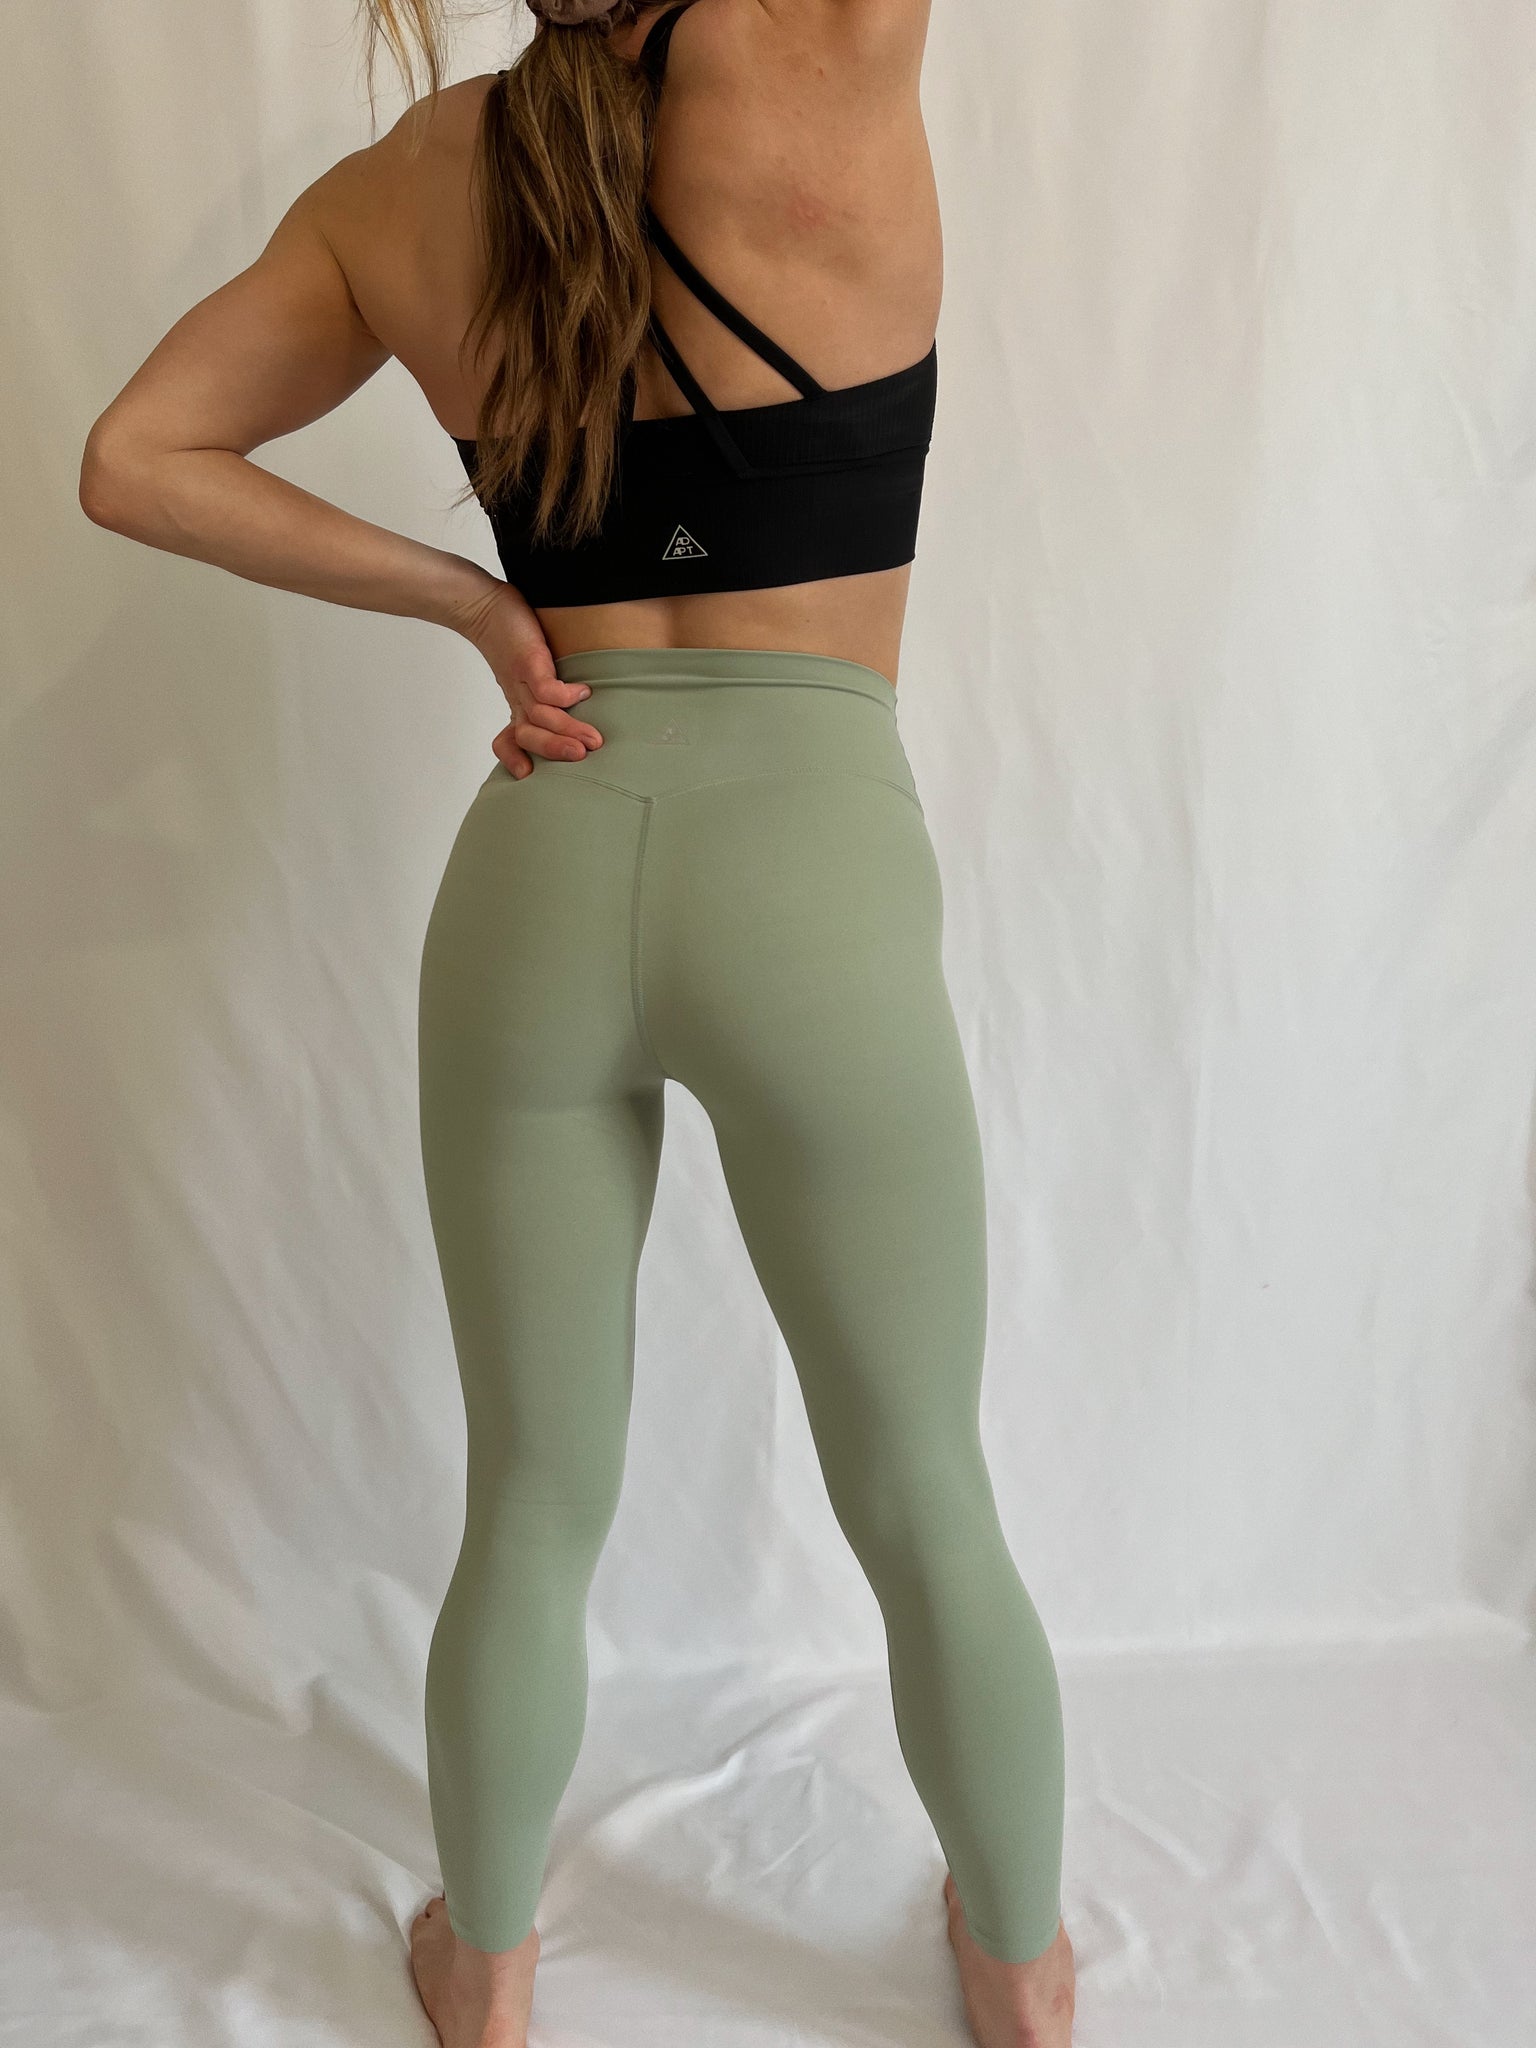 Unknown, Pants & Jumpsuits, Women Small Lined Leggings Thermal Tights  High Waisted Nude And Green 2 Pack